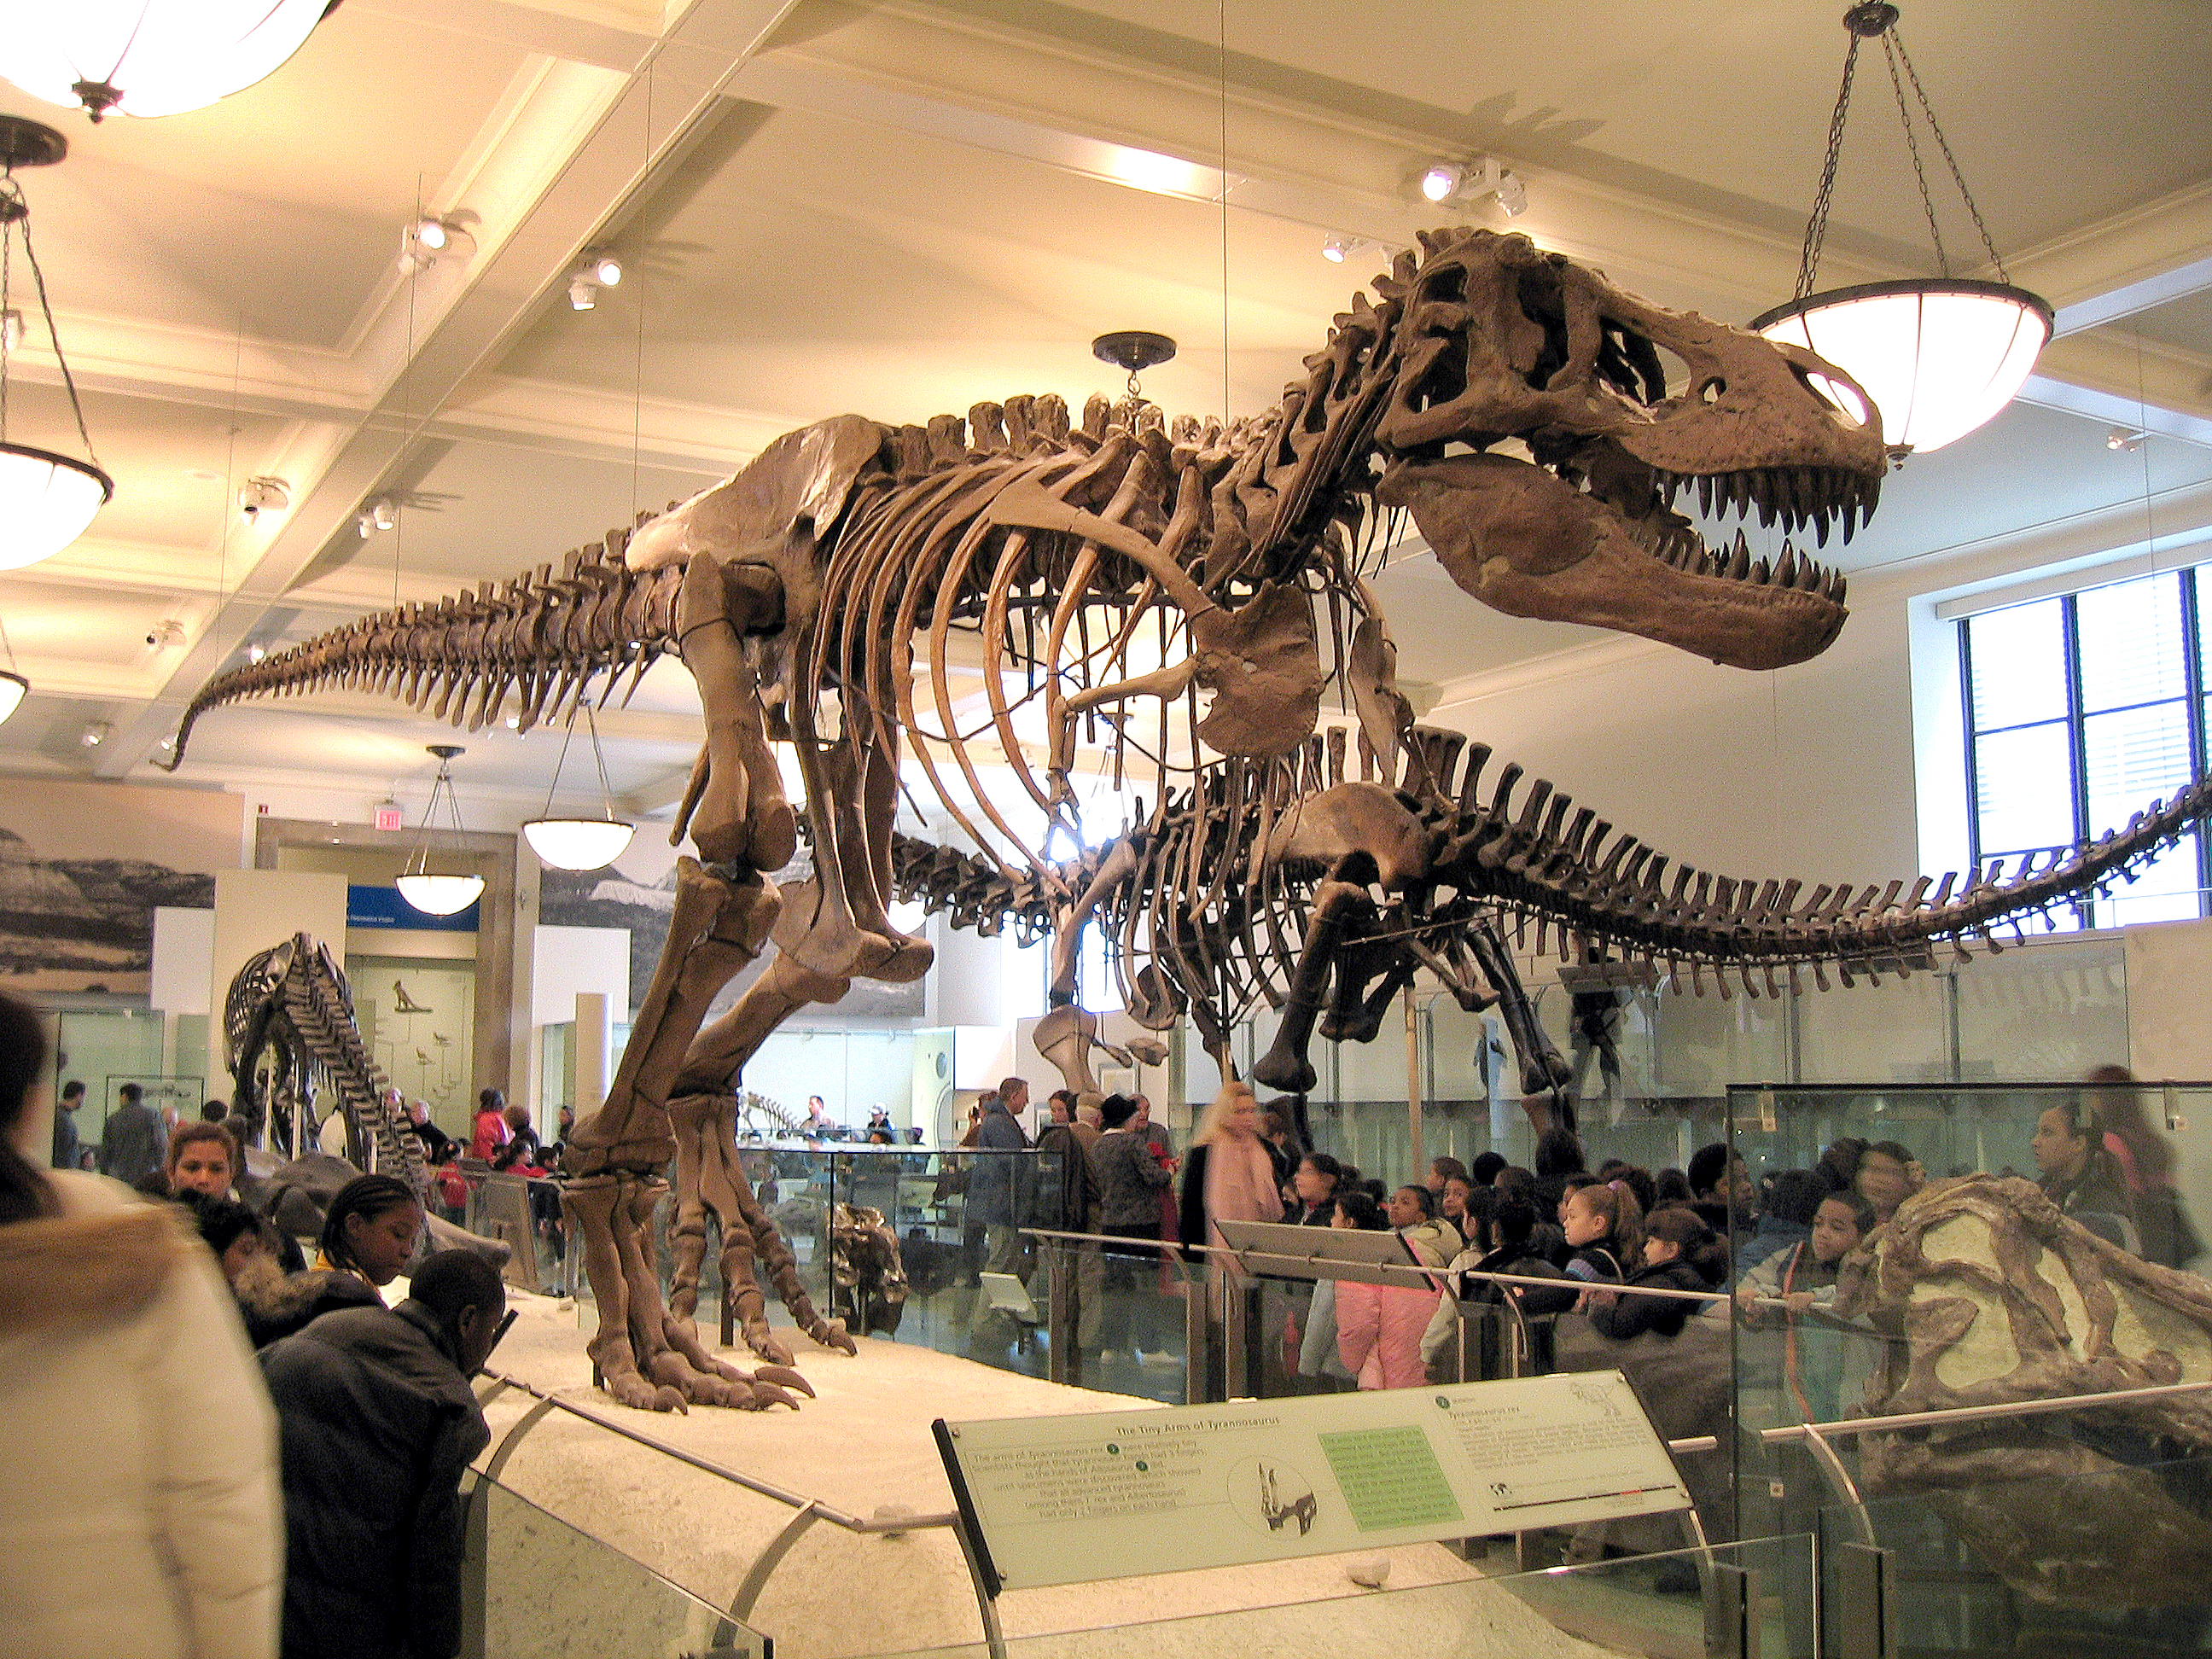 File:New York. American Museum of Natural History (2795323471).jpg - Wikimedia Commons